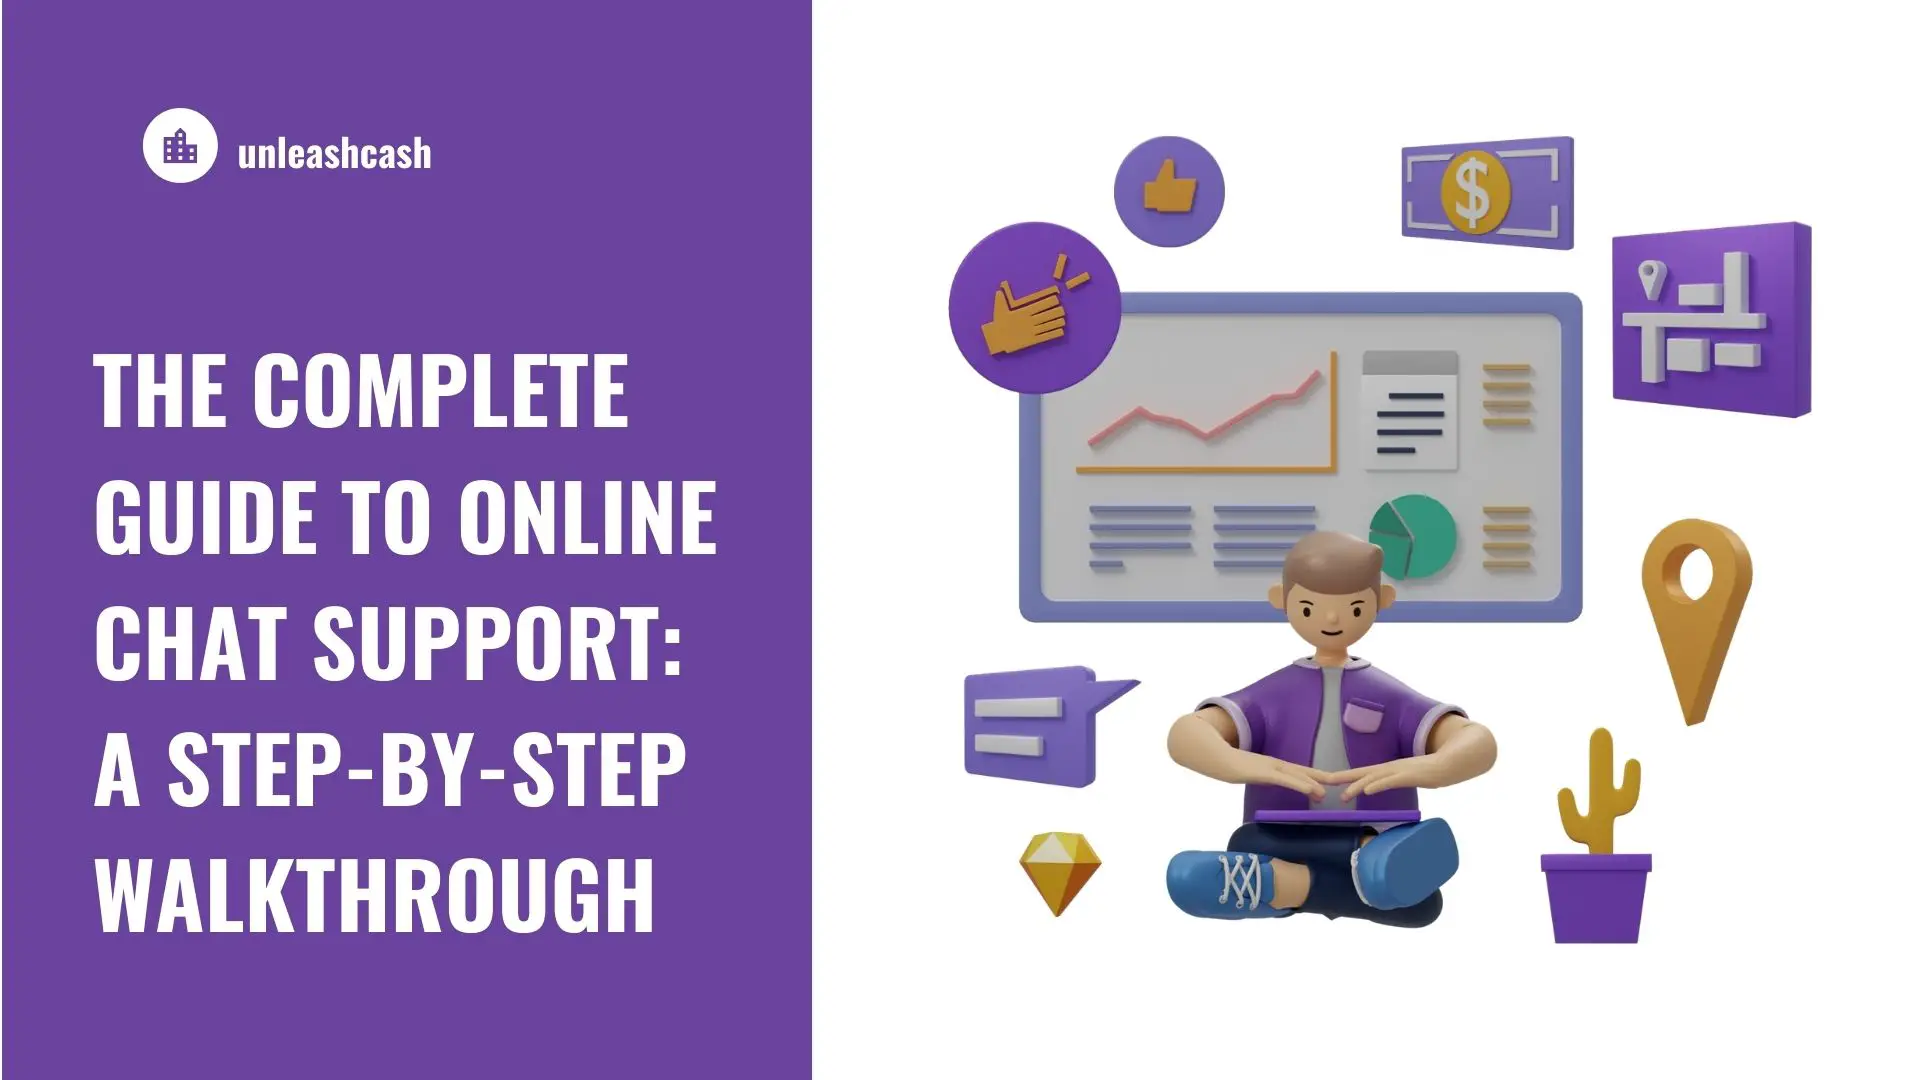 The Complete Guide To Online Chat Support A Step-By-Step Walkthrough